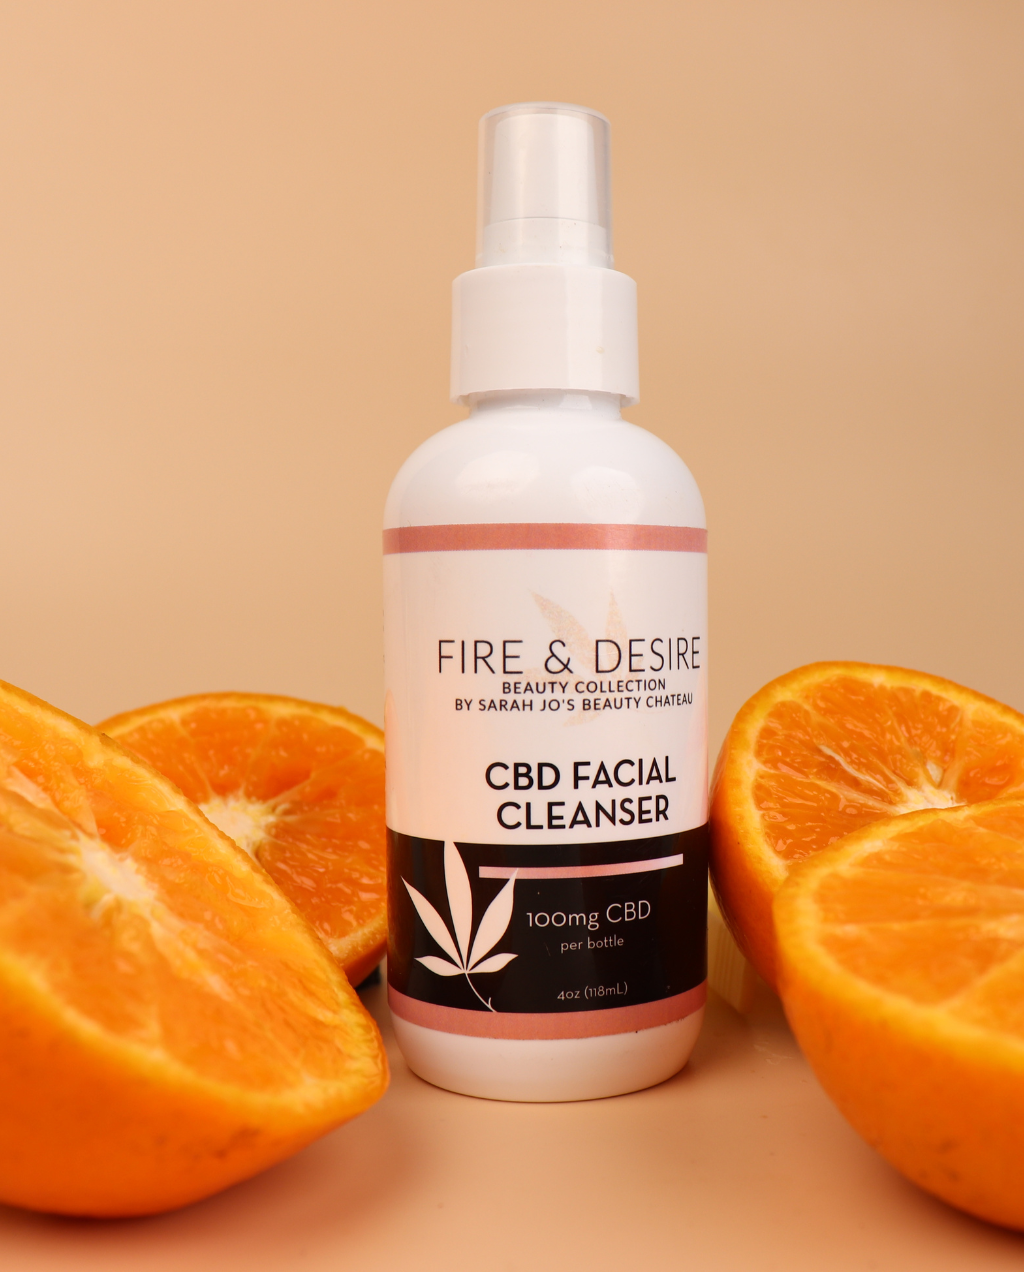 FIRE & DESIRE SKIN CARE FACIAL CLEANSER WITH CBD